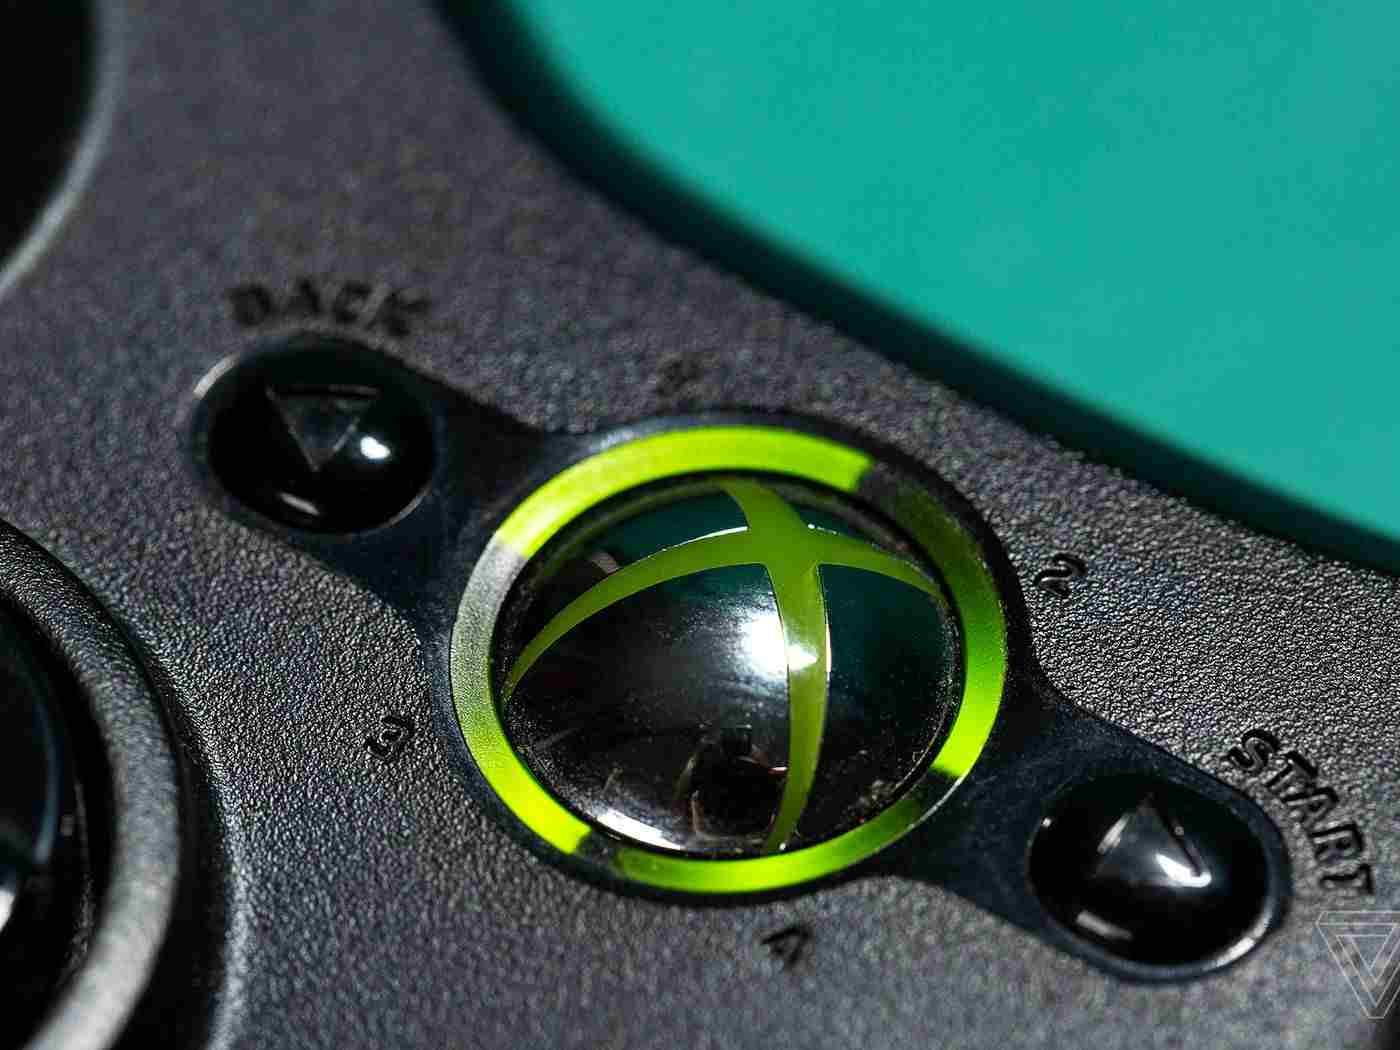 Press and hold the Xbox logo button